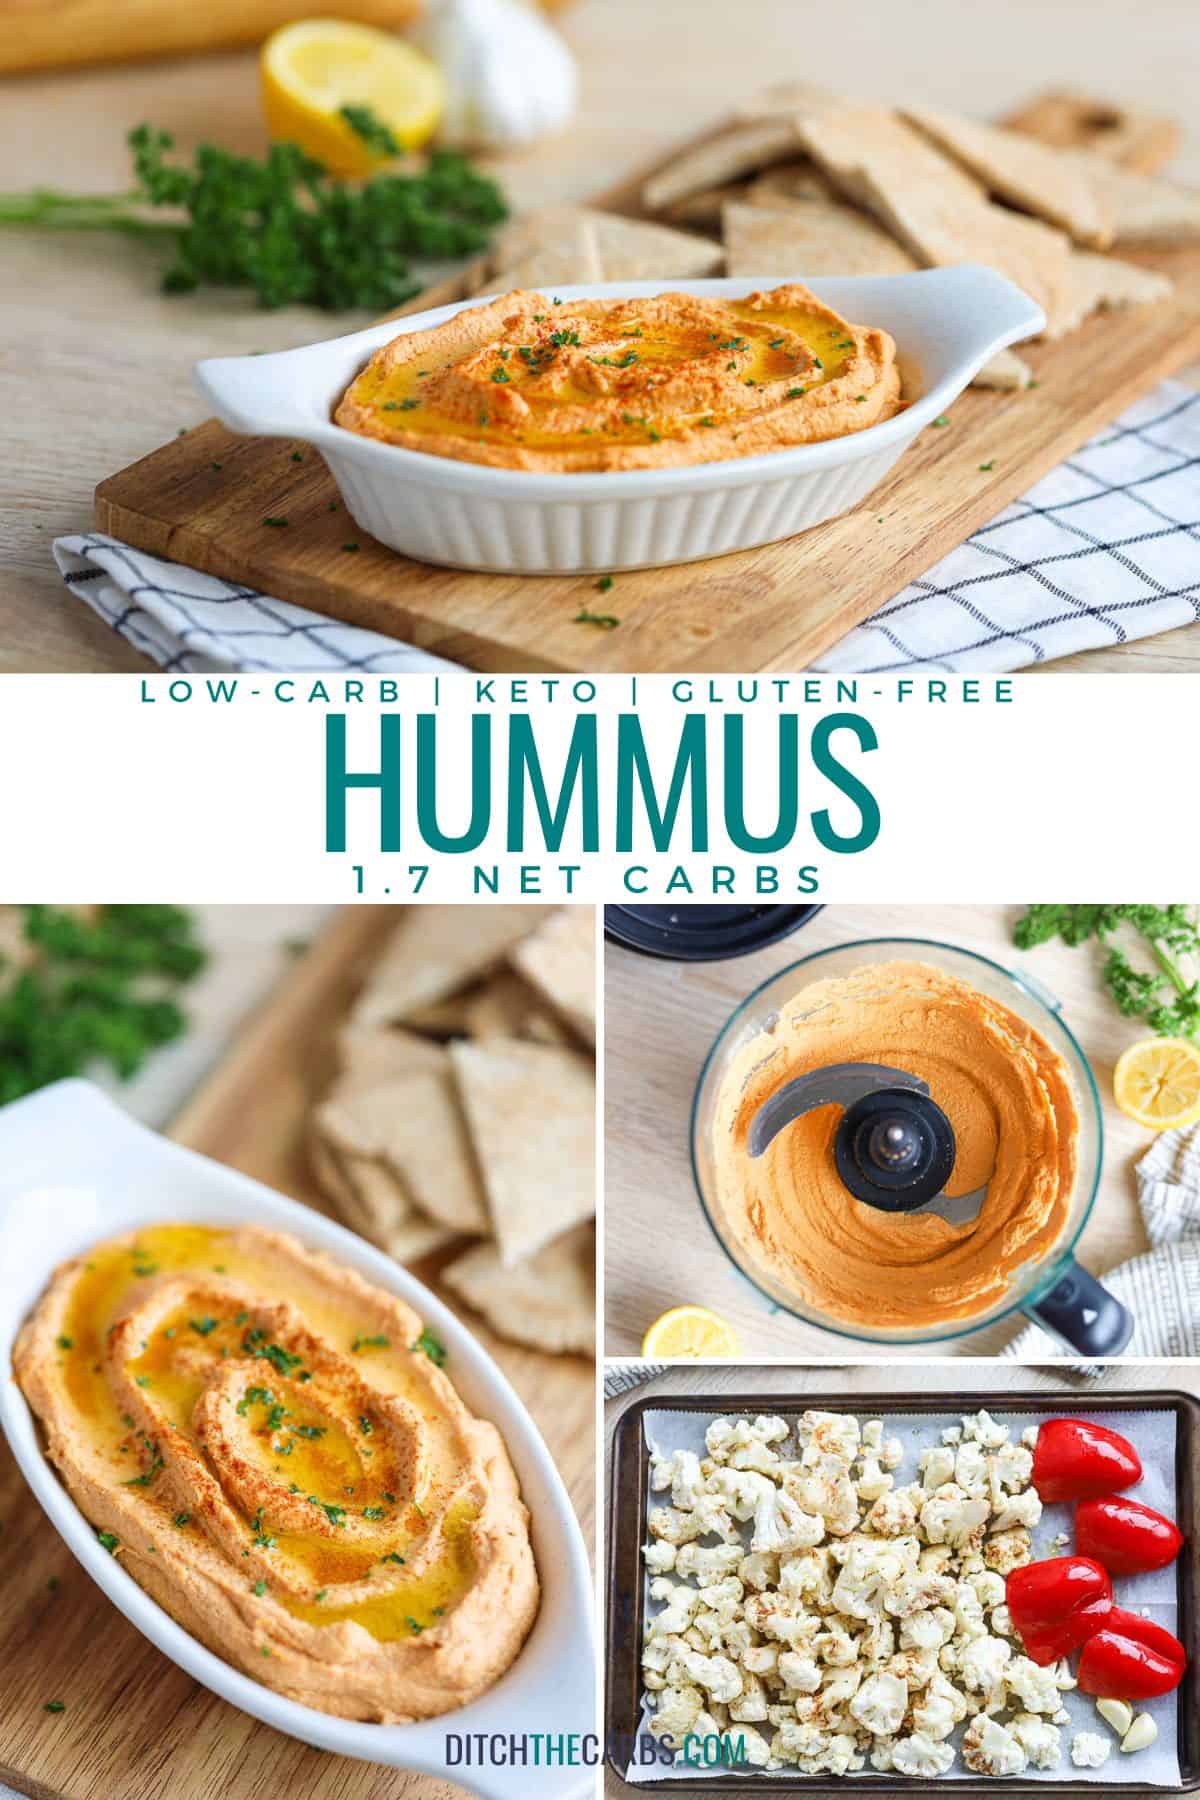 A variety of pictures showing low-carb hummus being made at various stages.